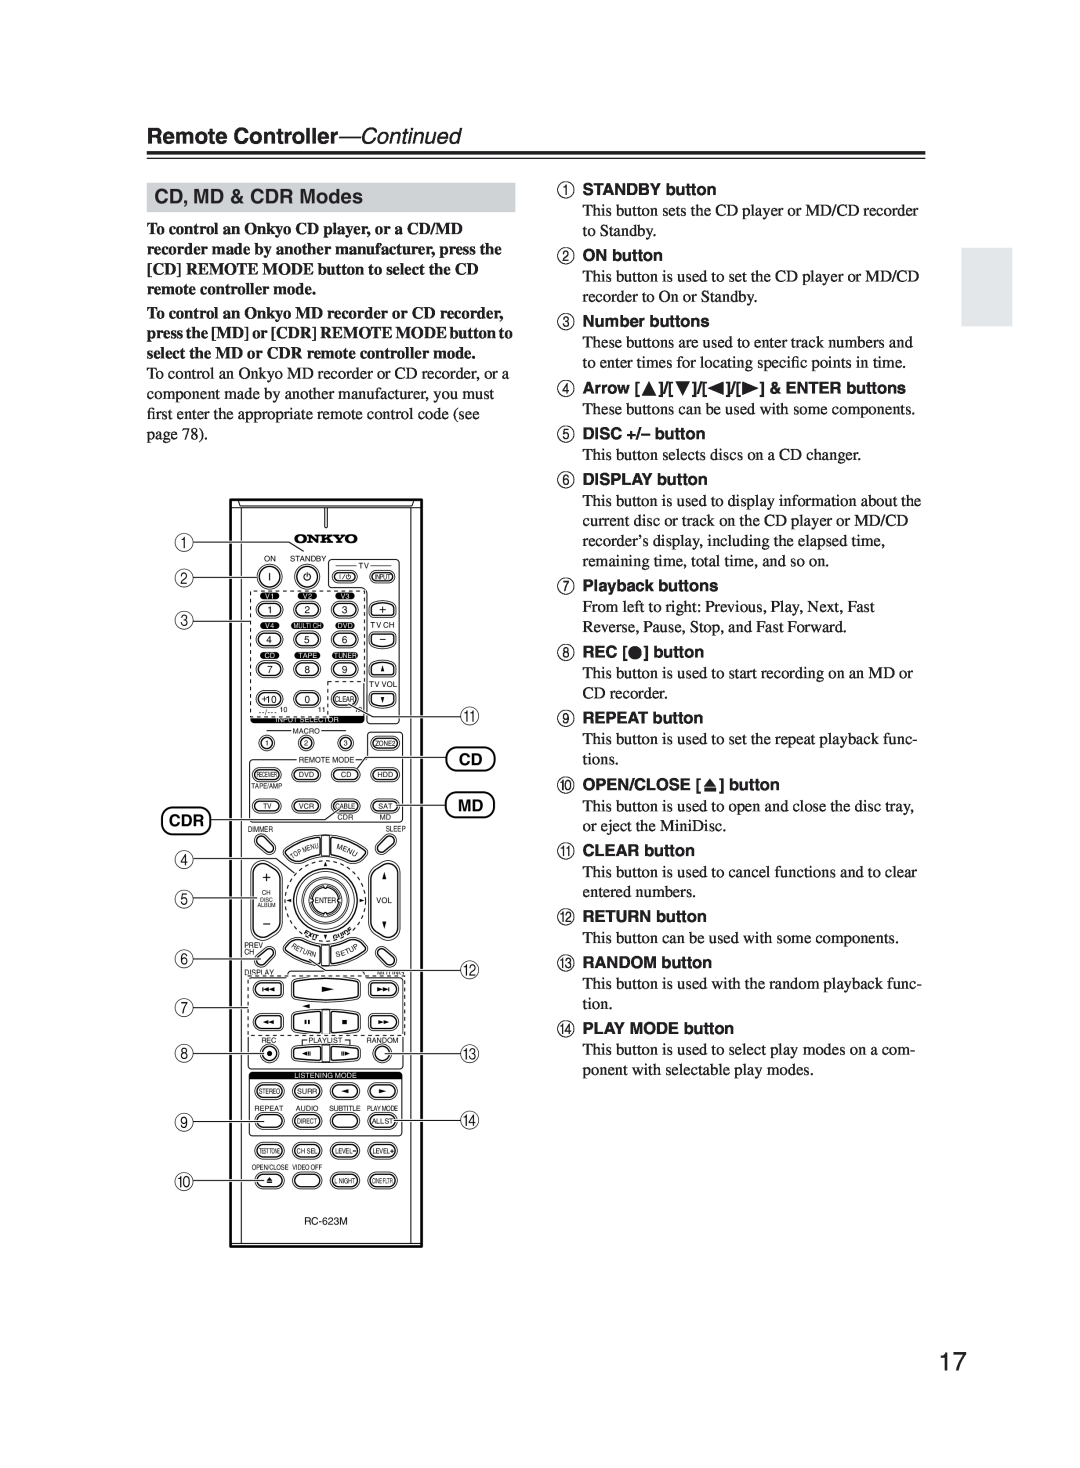 Onkyo TX-SR603X instruction manual CD, MD & CDR Modes, Remote Controller—Continued 